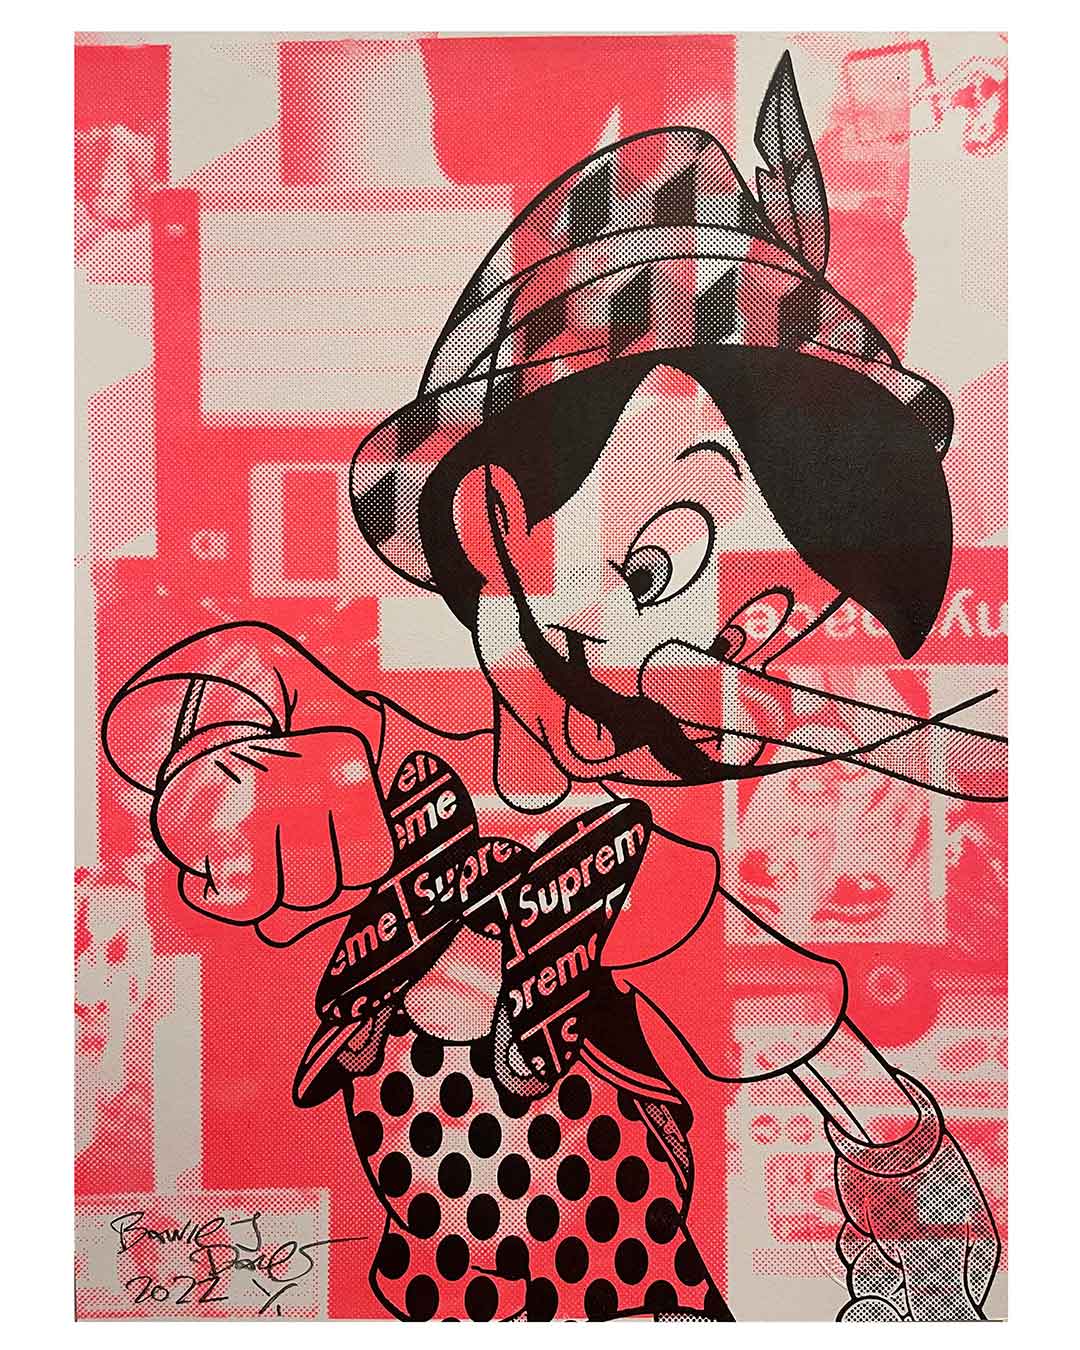 Mini Hypebeast Boy Print by Barrie J Davies 2022 - unframed Silkscreen print on paper (hand finished) edition of 1/1 - A4 size 29cm x 21cm.